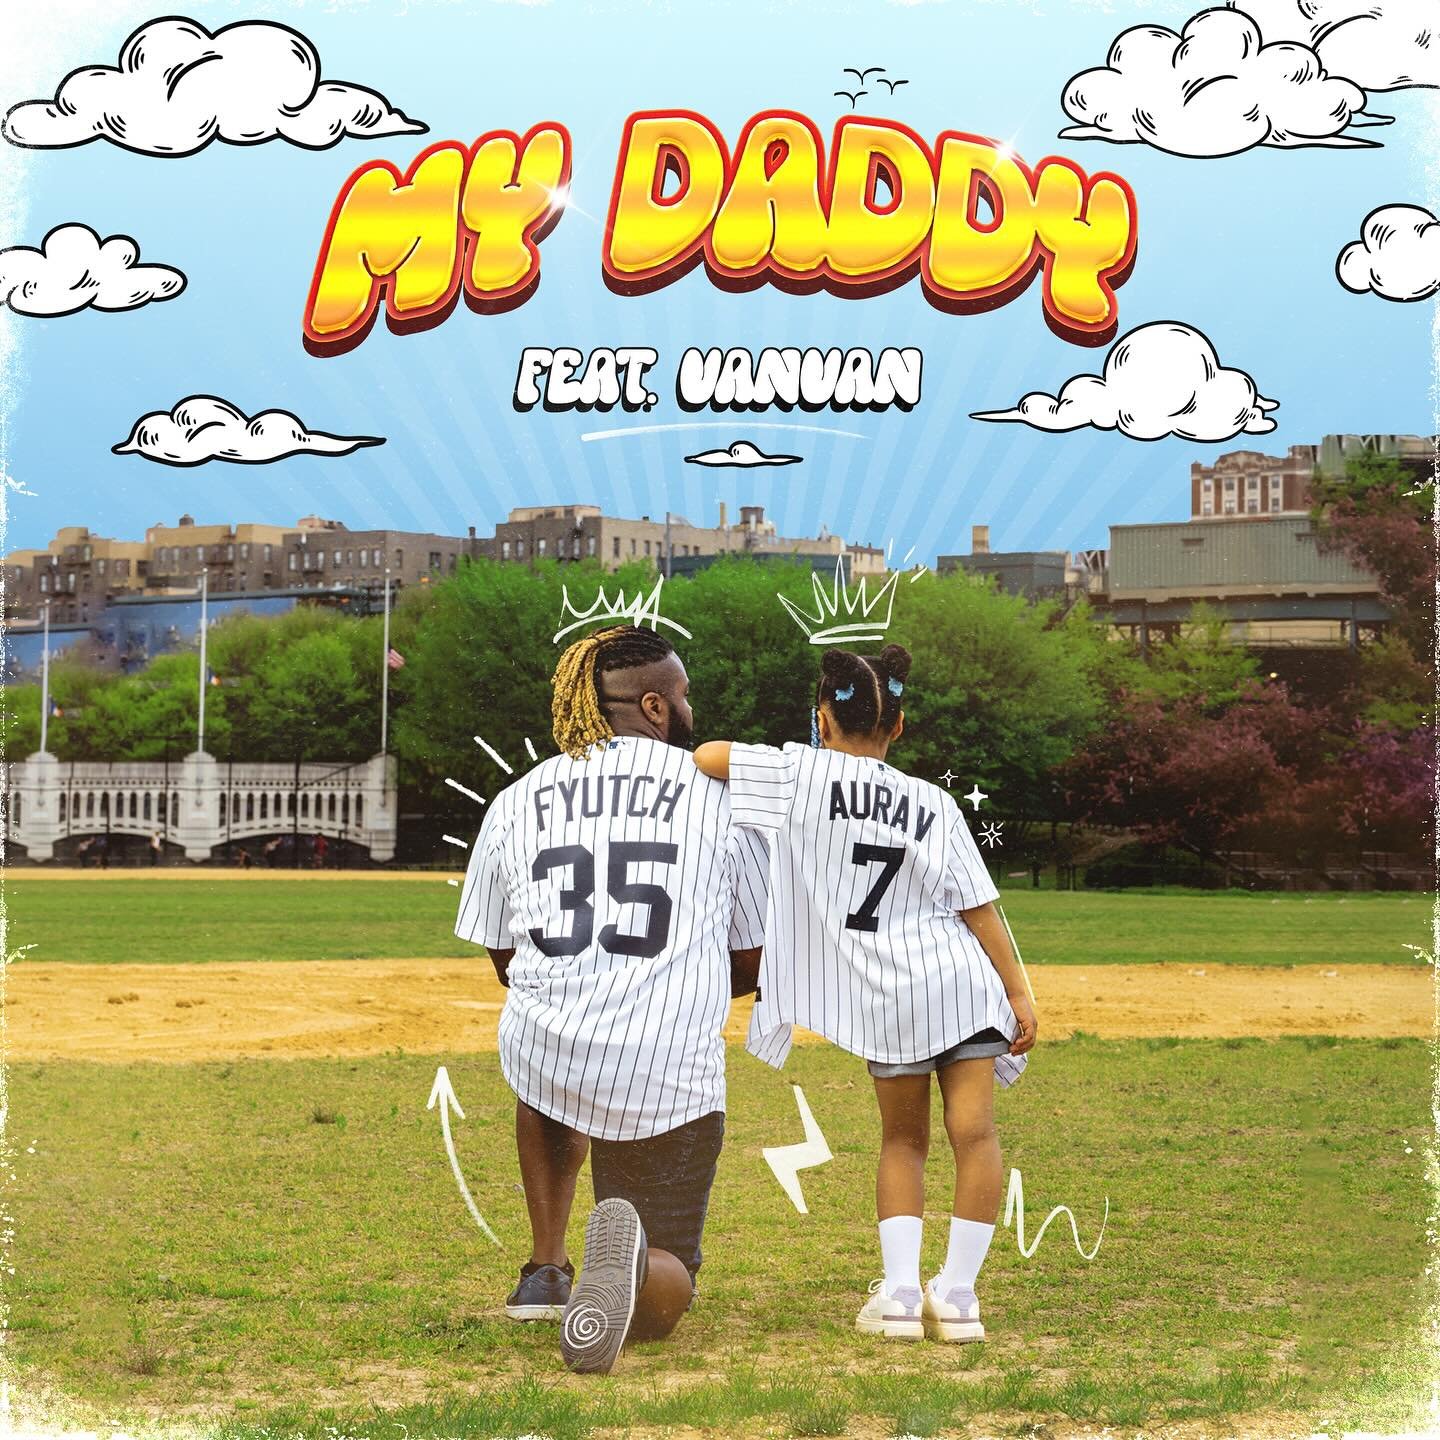 &ldquo;My Daddy&rdquo; is out now! Father daughter BOP featuring VanVan! Link in bio! Run it up! Girl Dads, let&rsquo;s goooo! Cover by @_ignatius_arts. Photos by @sampoppshoots Additional production by @konsciencebeatz #fatherdaughterlove #girldad #